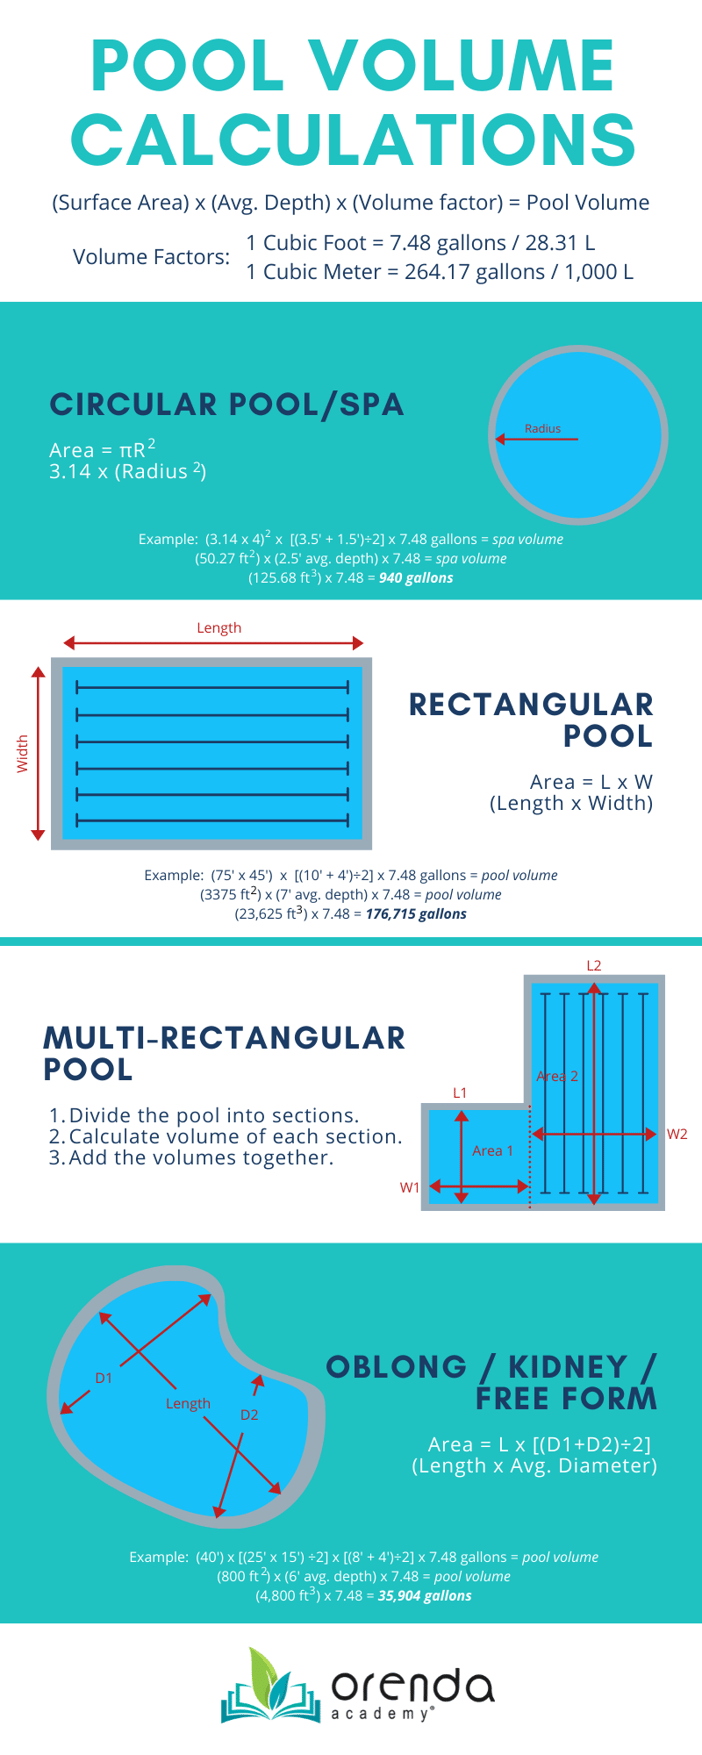 Pool Volume Calculations infographic-3